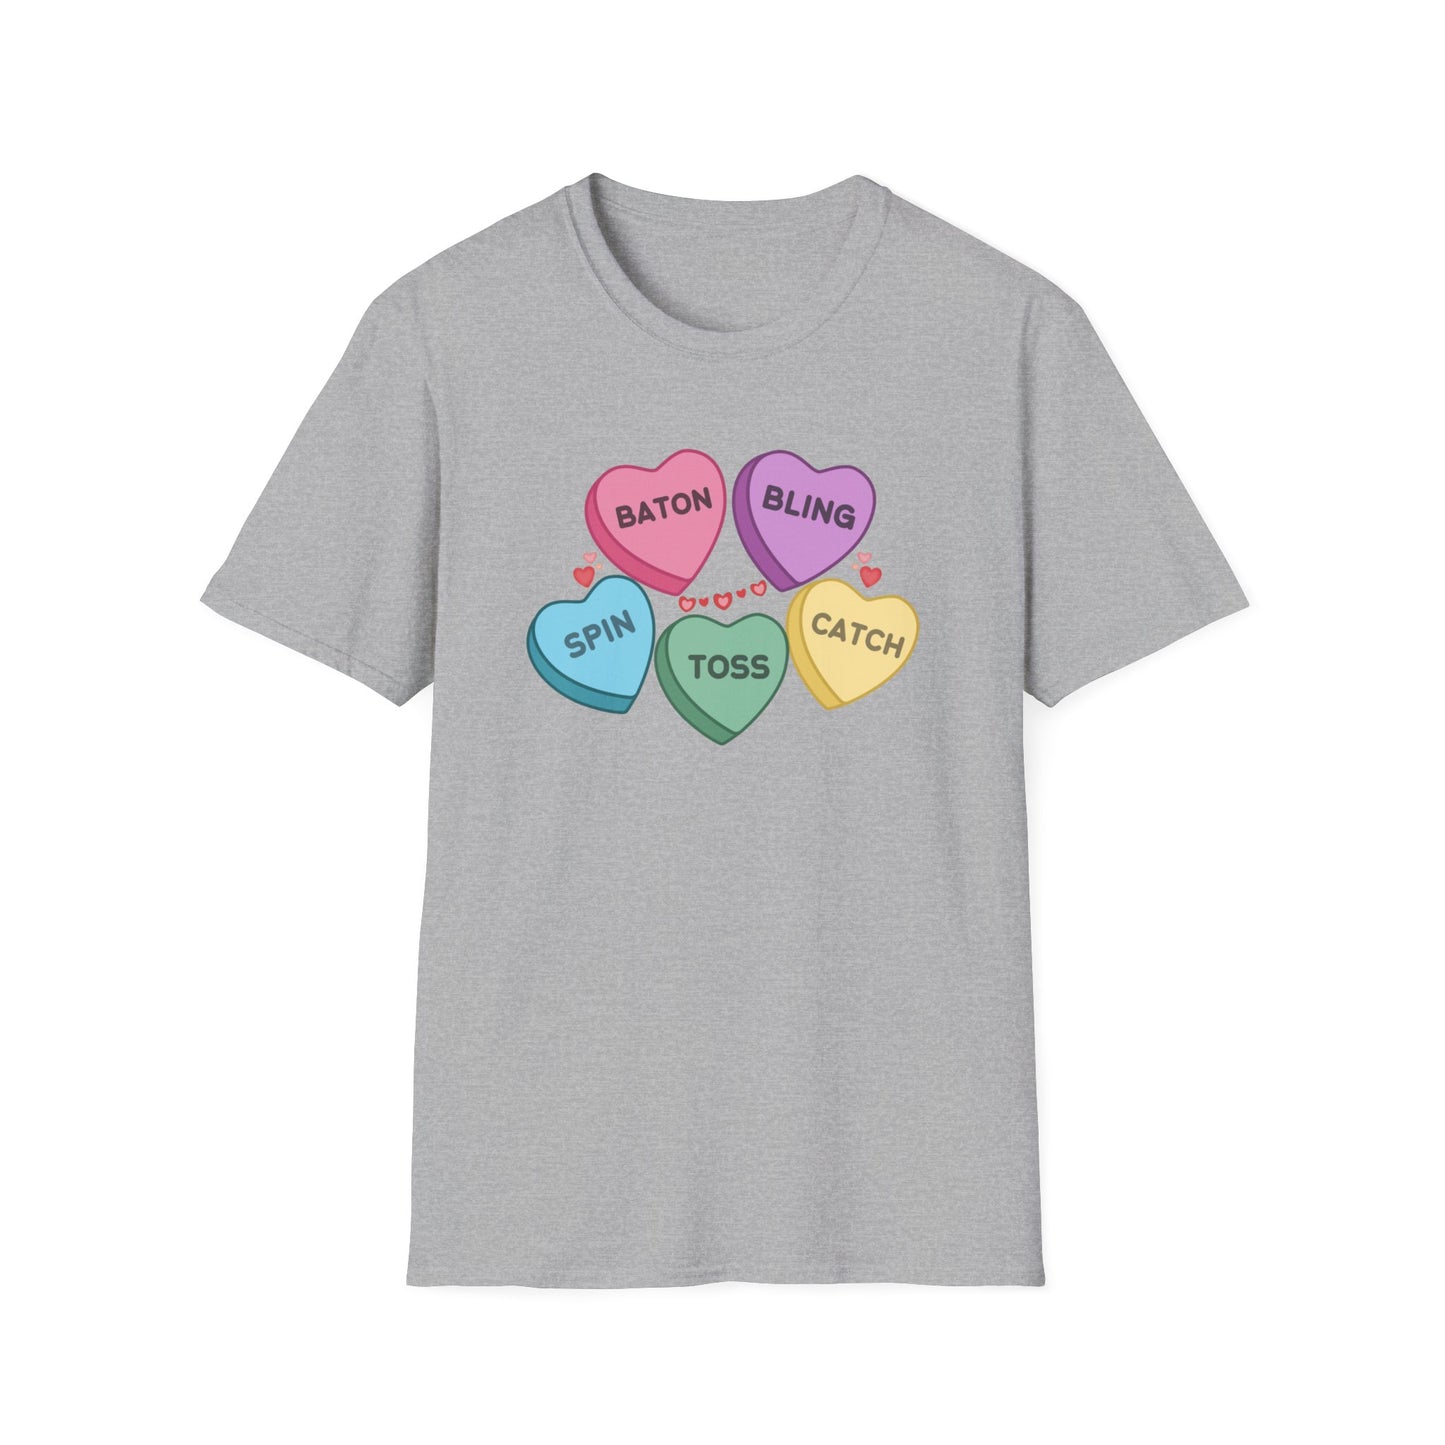 Candy Hearts Twirler Unisex Softstyle T-Shirt, Baton Twirler Valentines Day T-Shirt, Gift for Her for Valentines Day